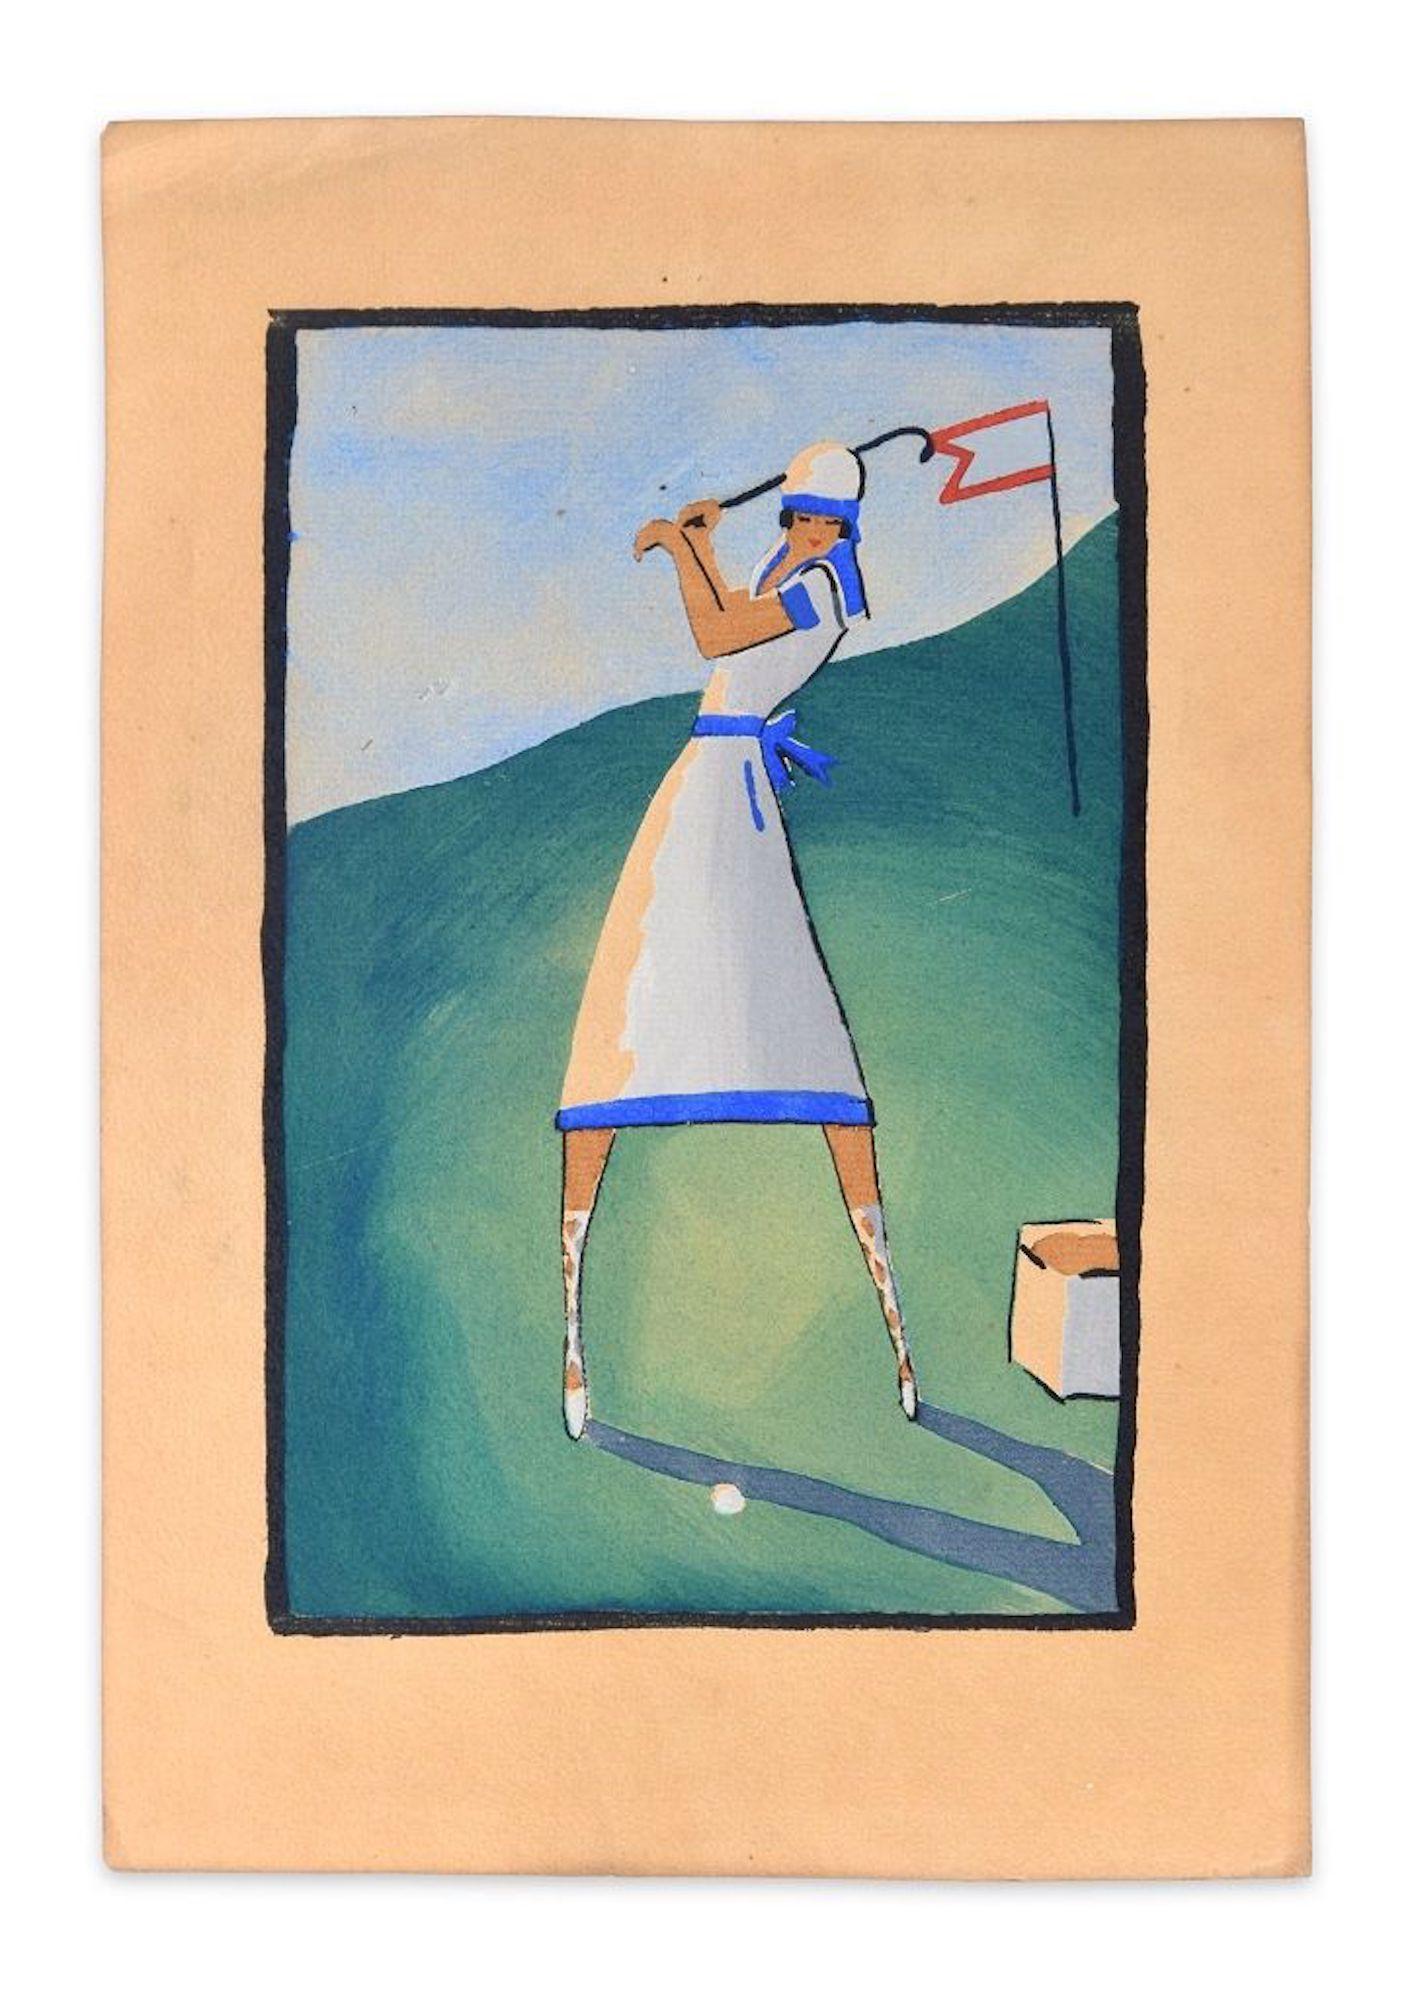 Golf Player / Woodcut Hand Colored in Tempera on Paper - Art Deco - 1920s - Print by Unknown